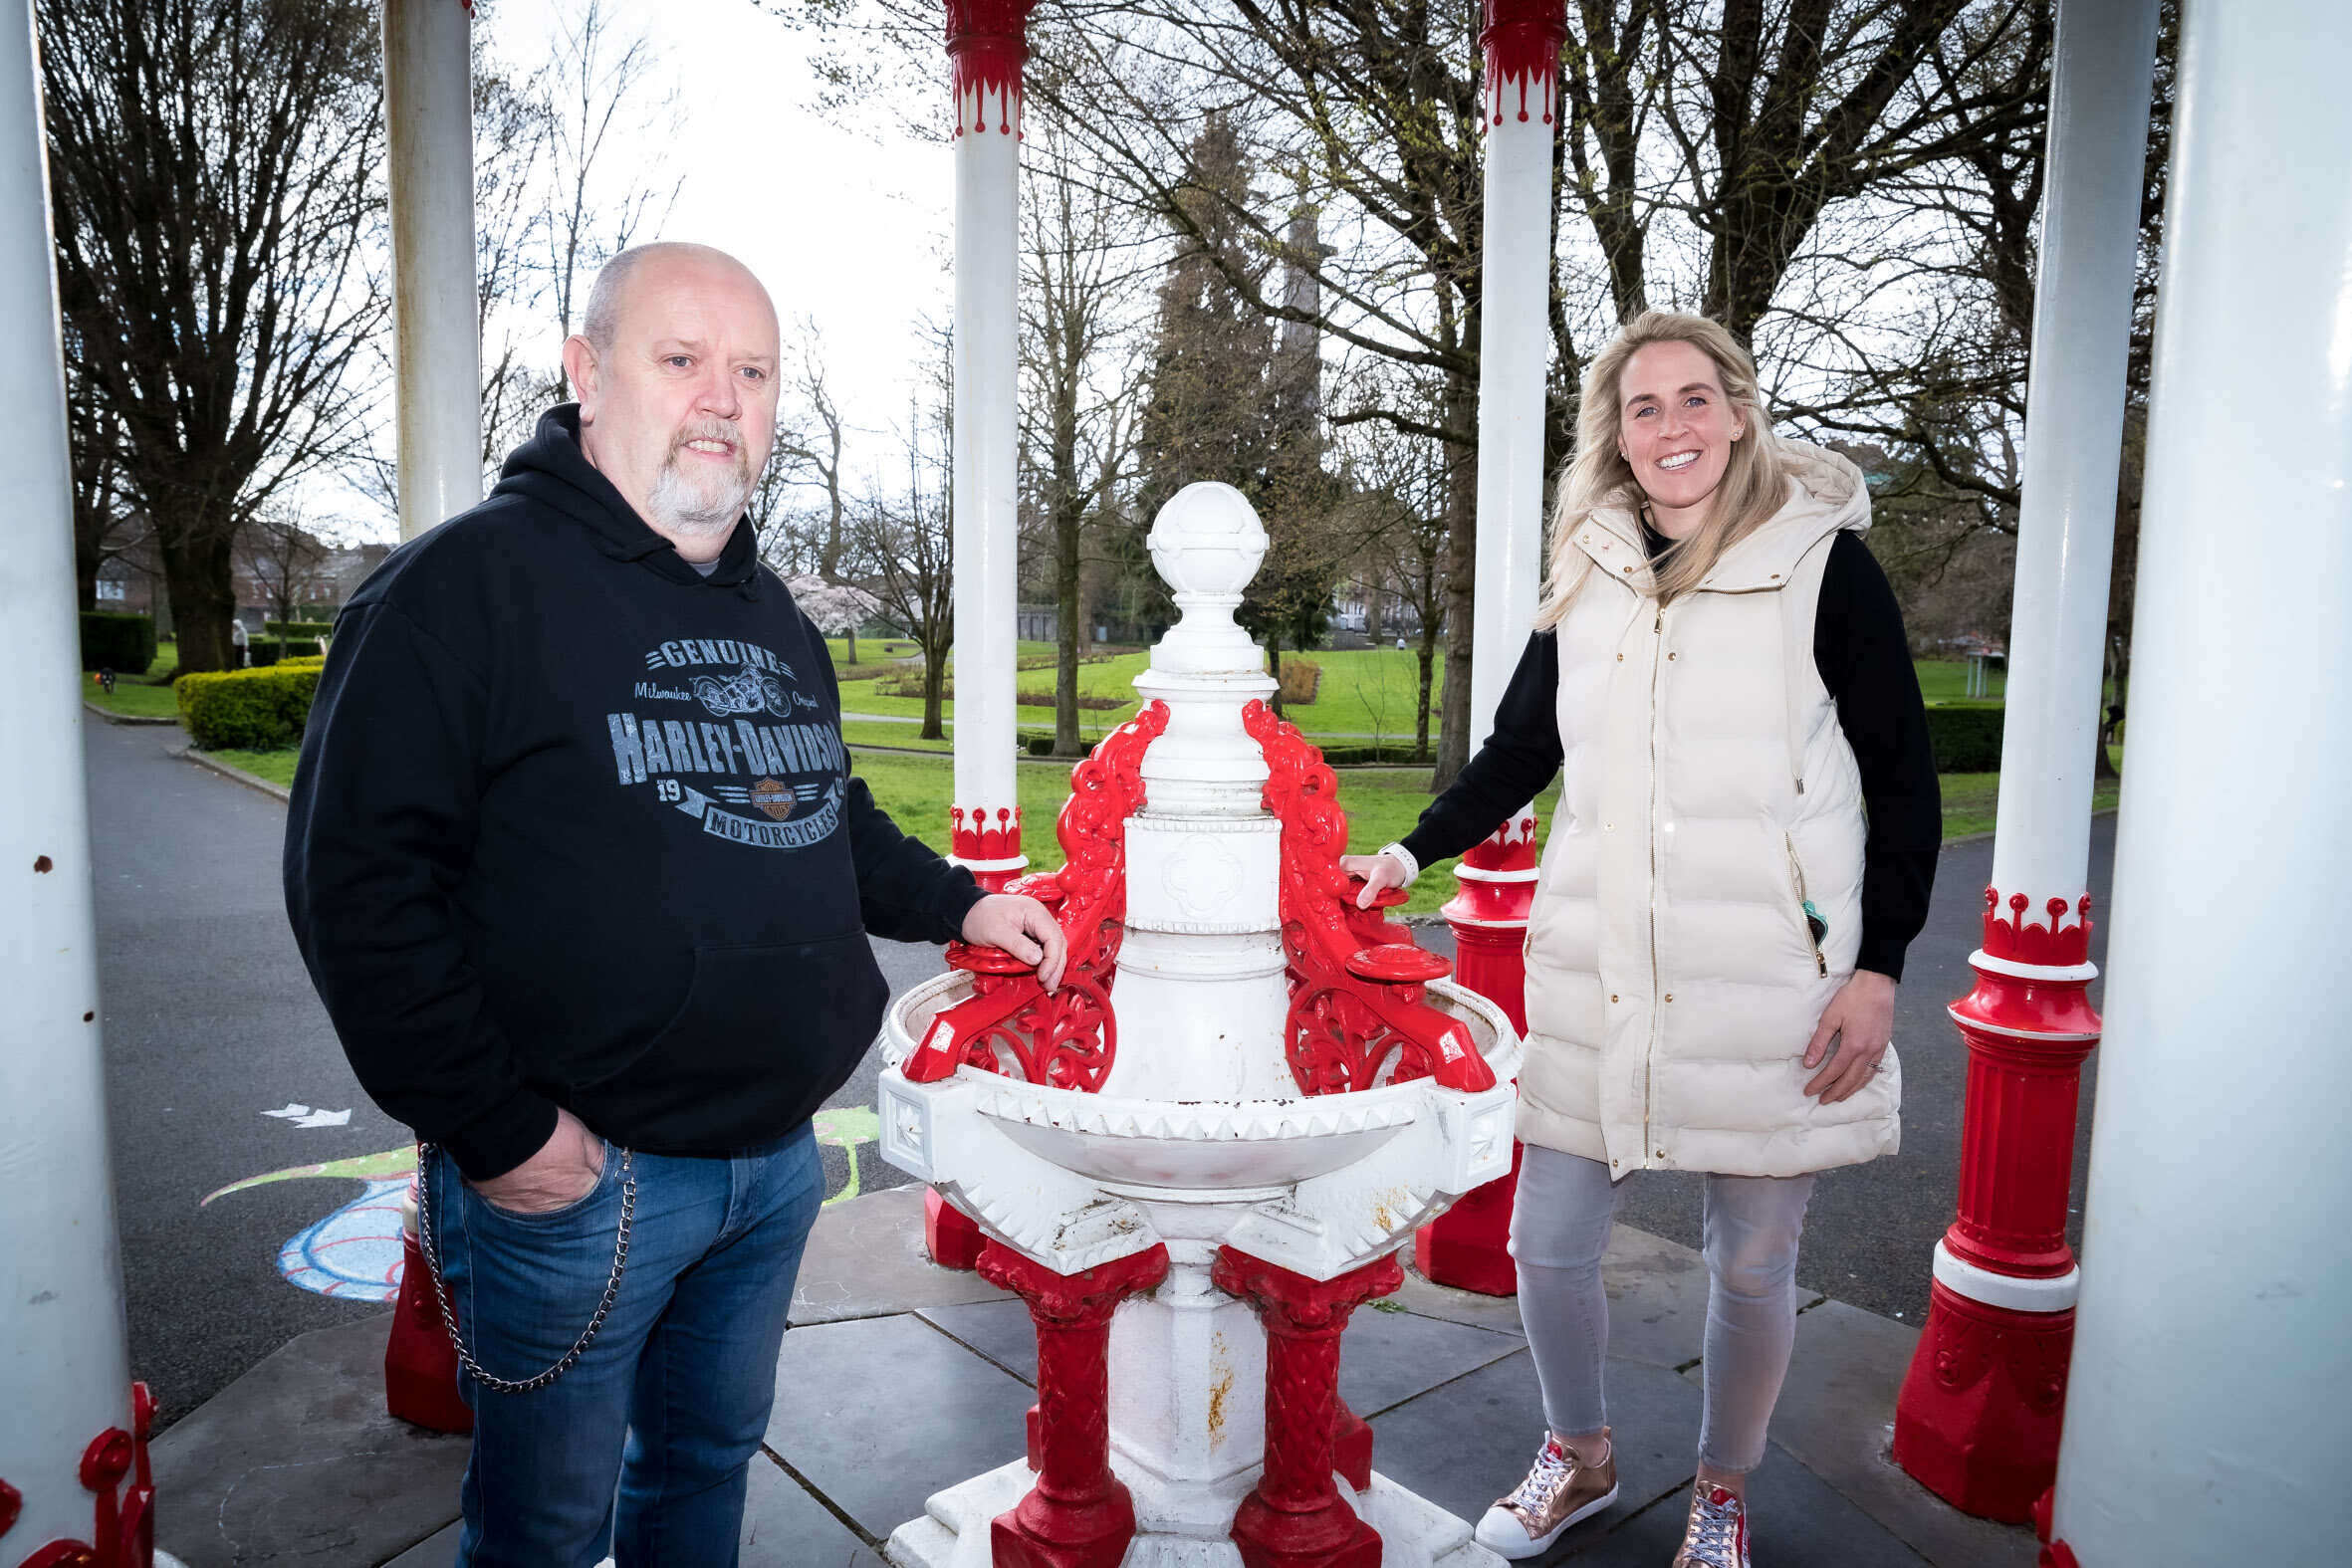 Cliona’s foundation Ambassador Joy Neville at the launch of "Ireland's Forgotten Families" People’s Park, Limerick.  Picture: Keith Wiseman.